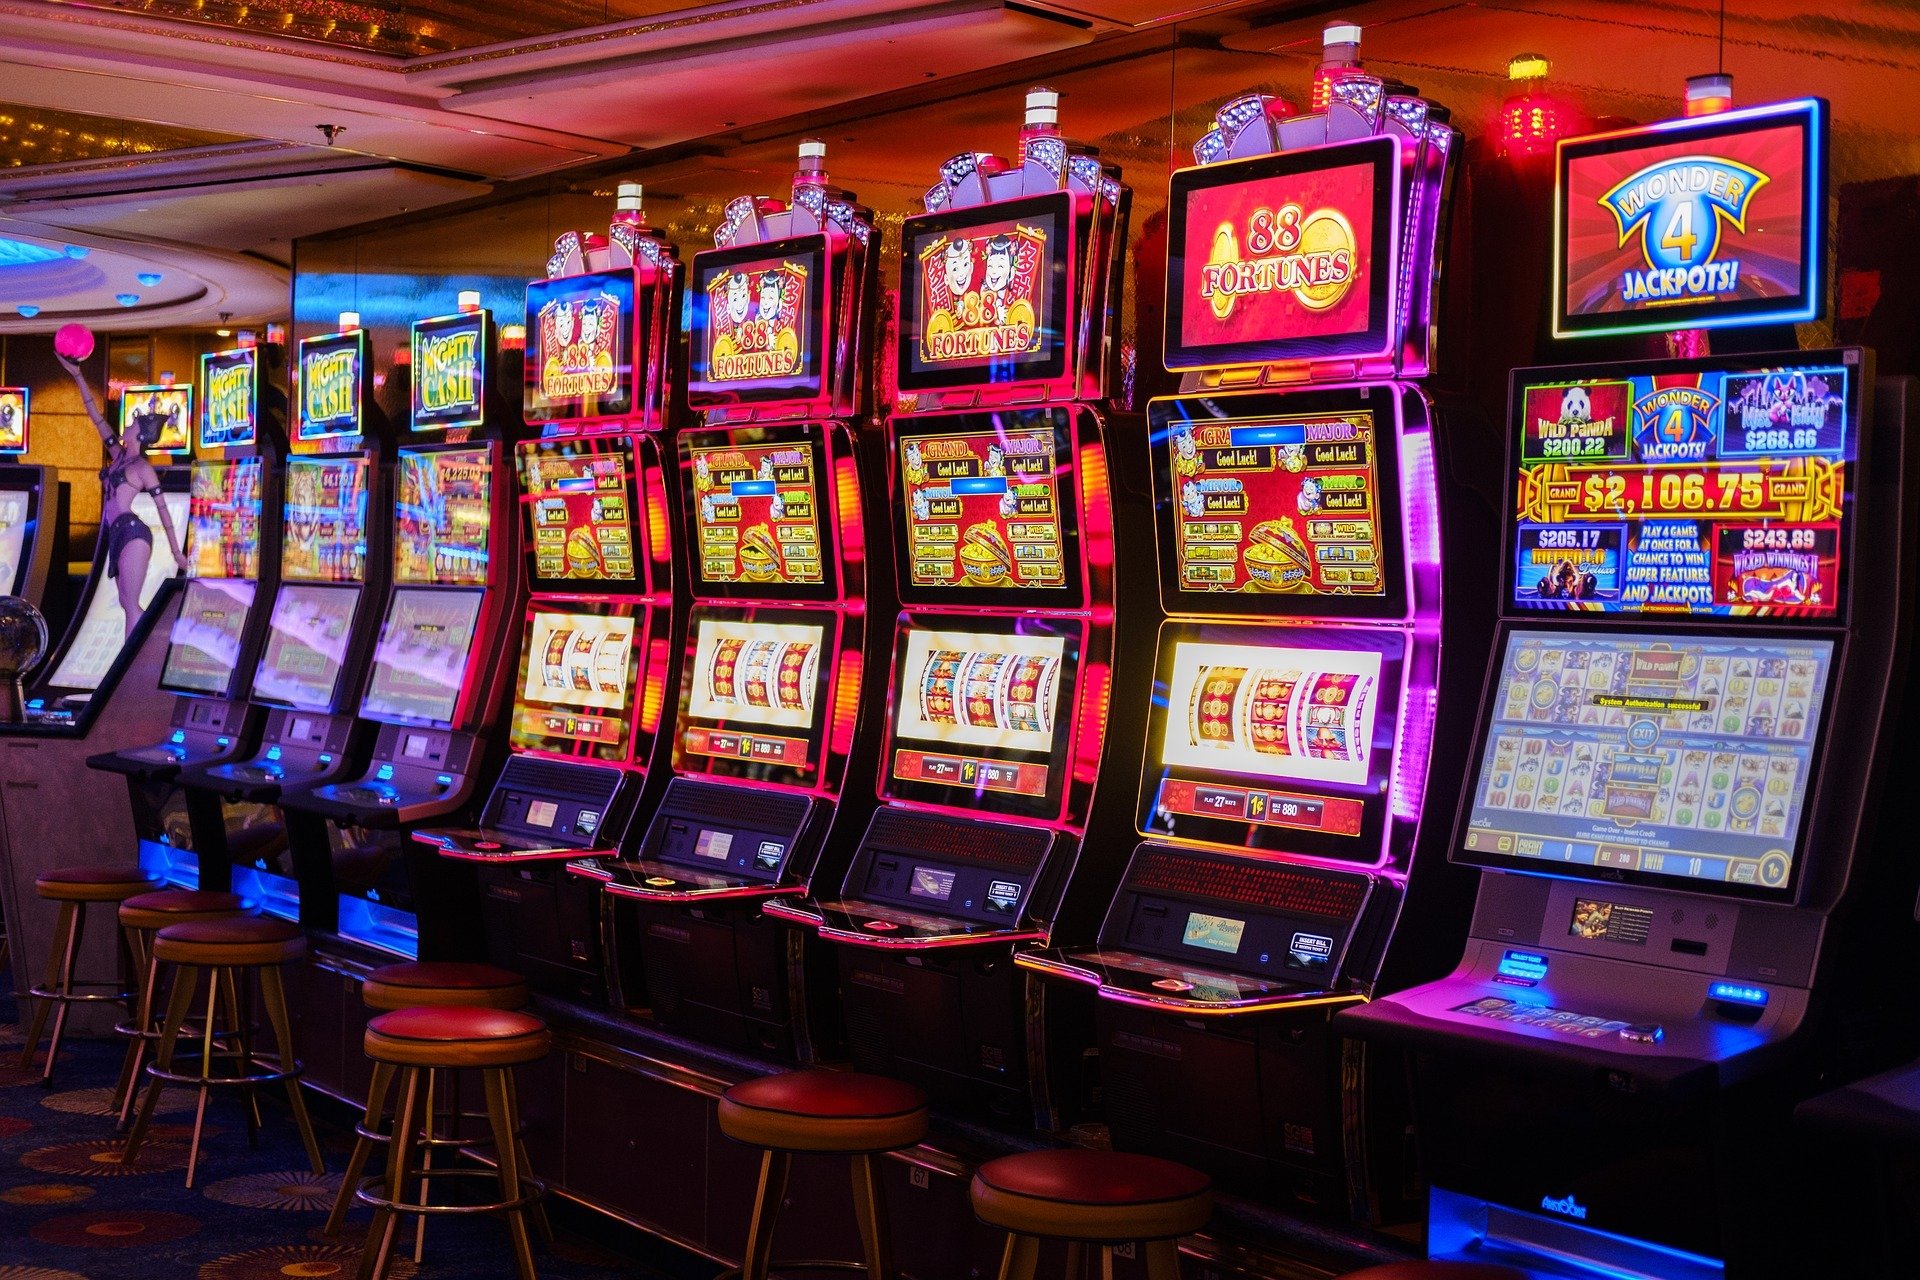 How to find slot machines that are most likely to hit Finger free poker slots online games